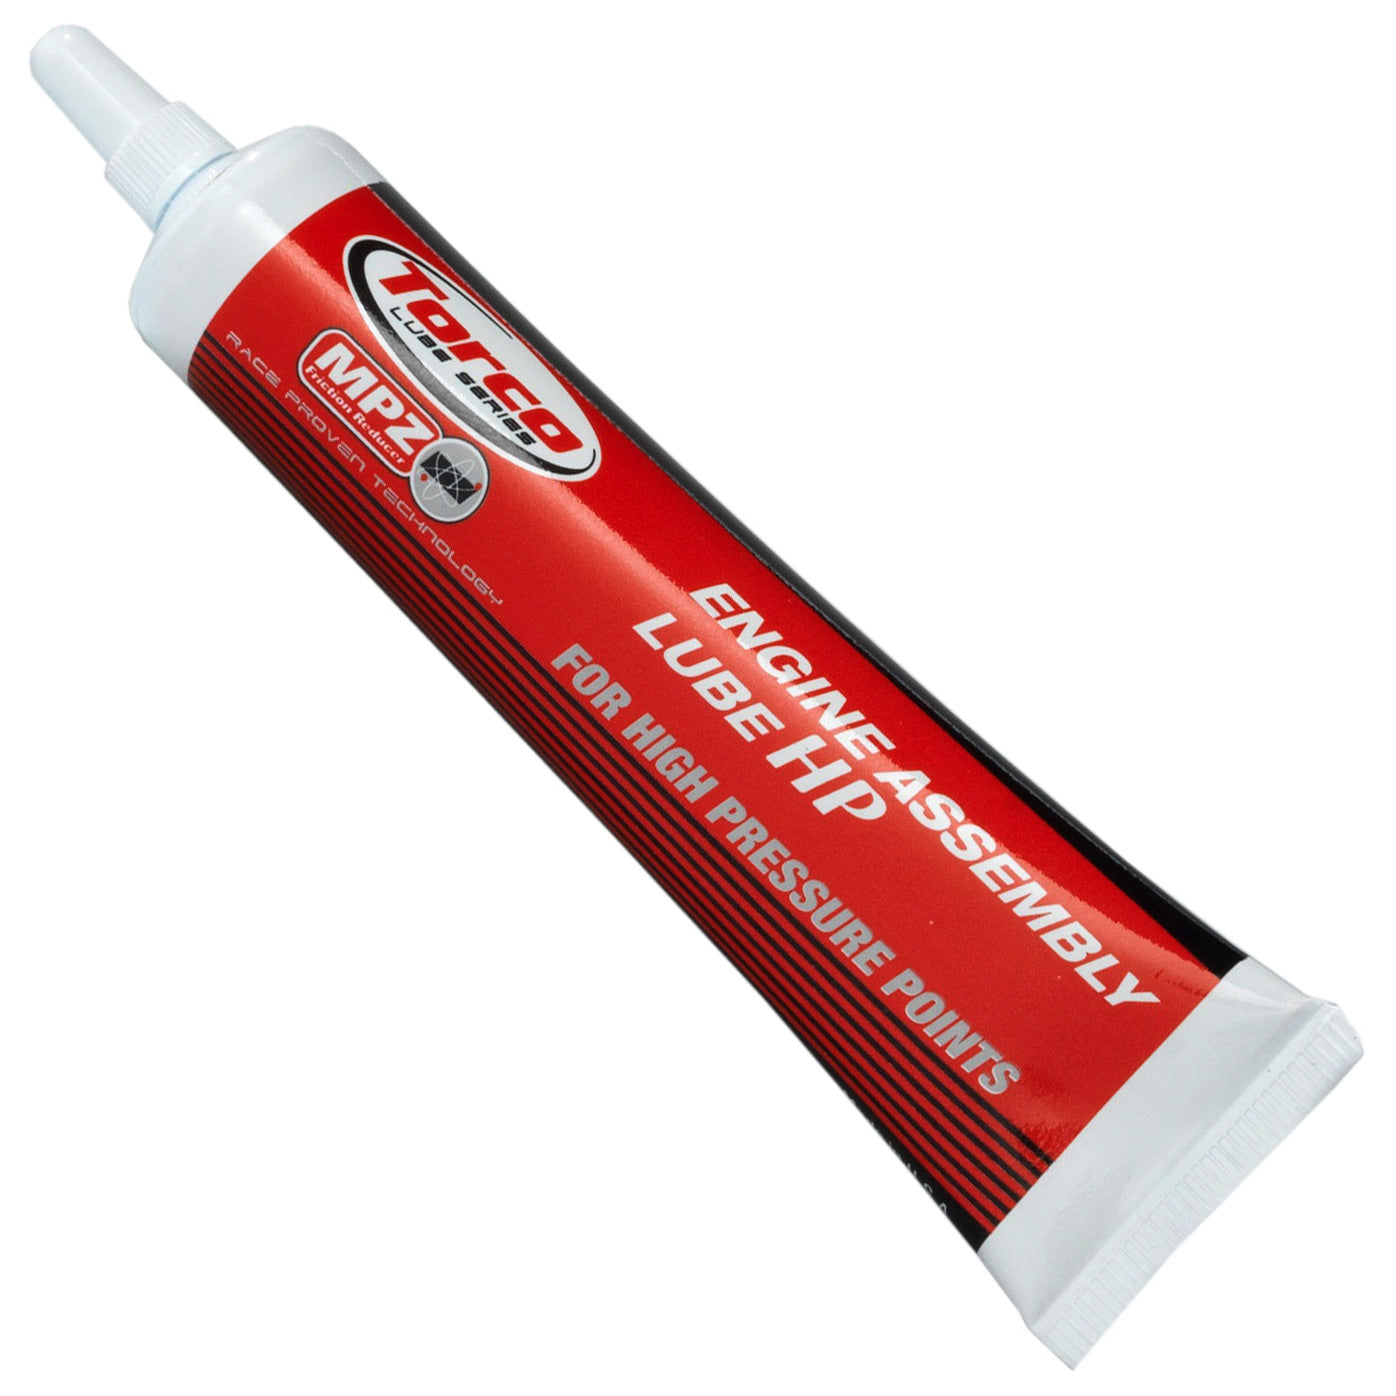 Engine Assembly Lube for High pressure points